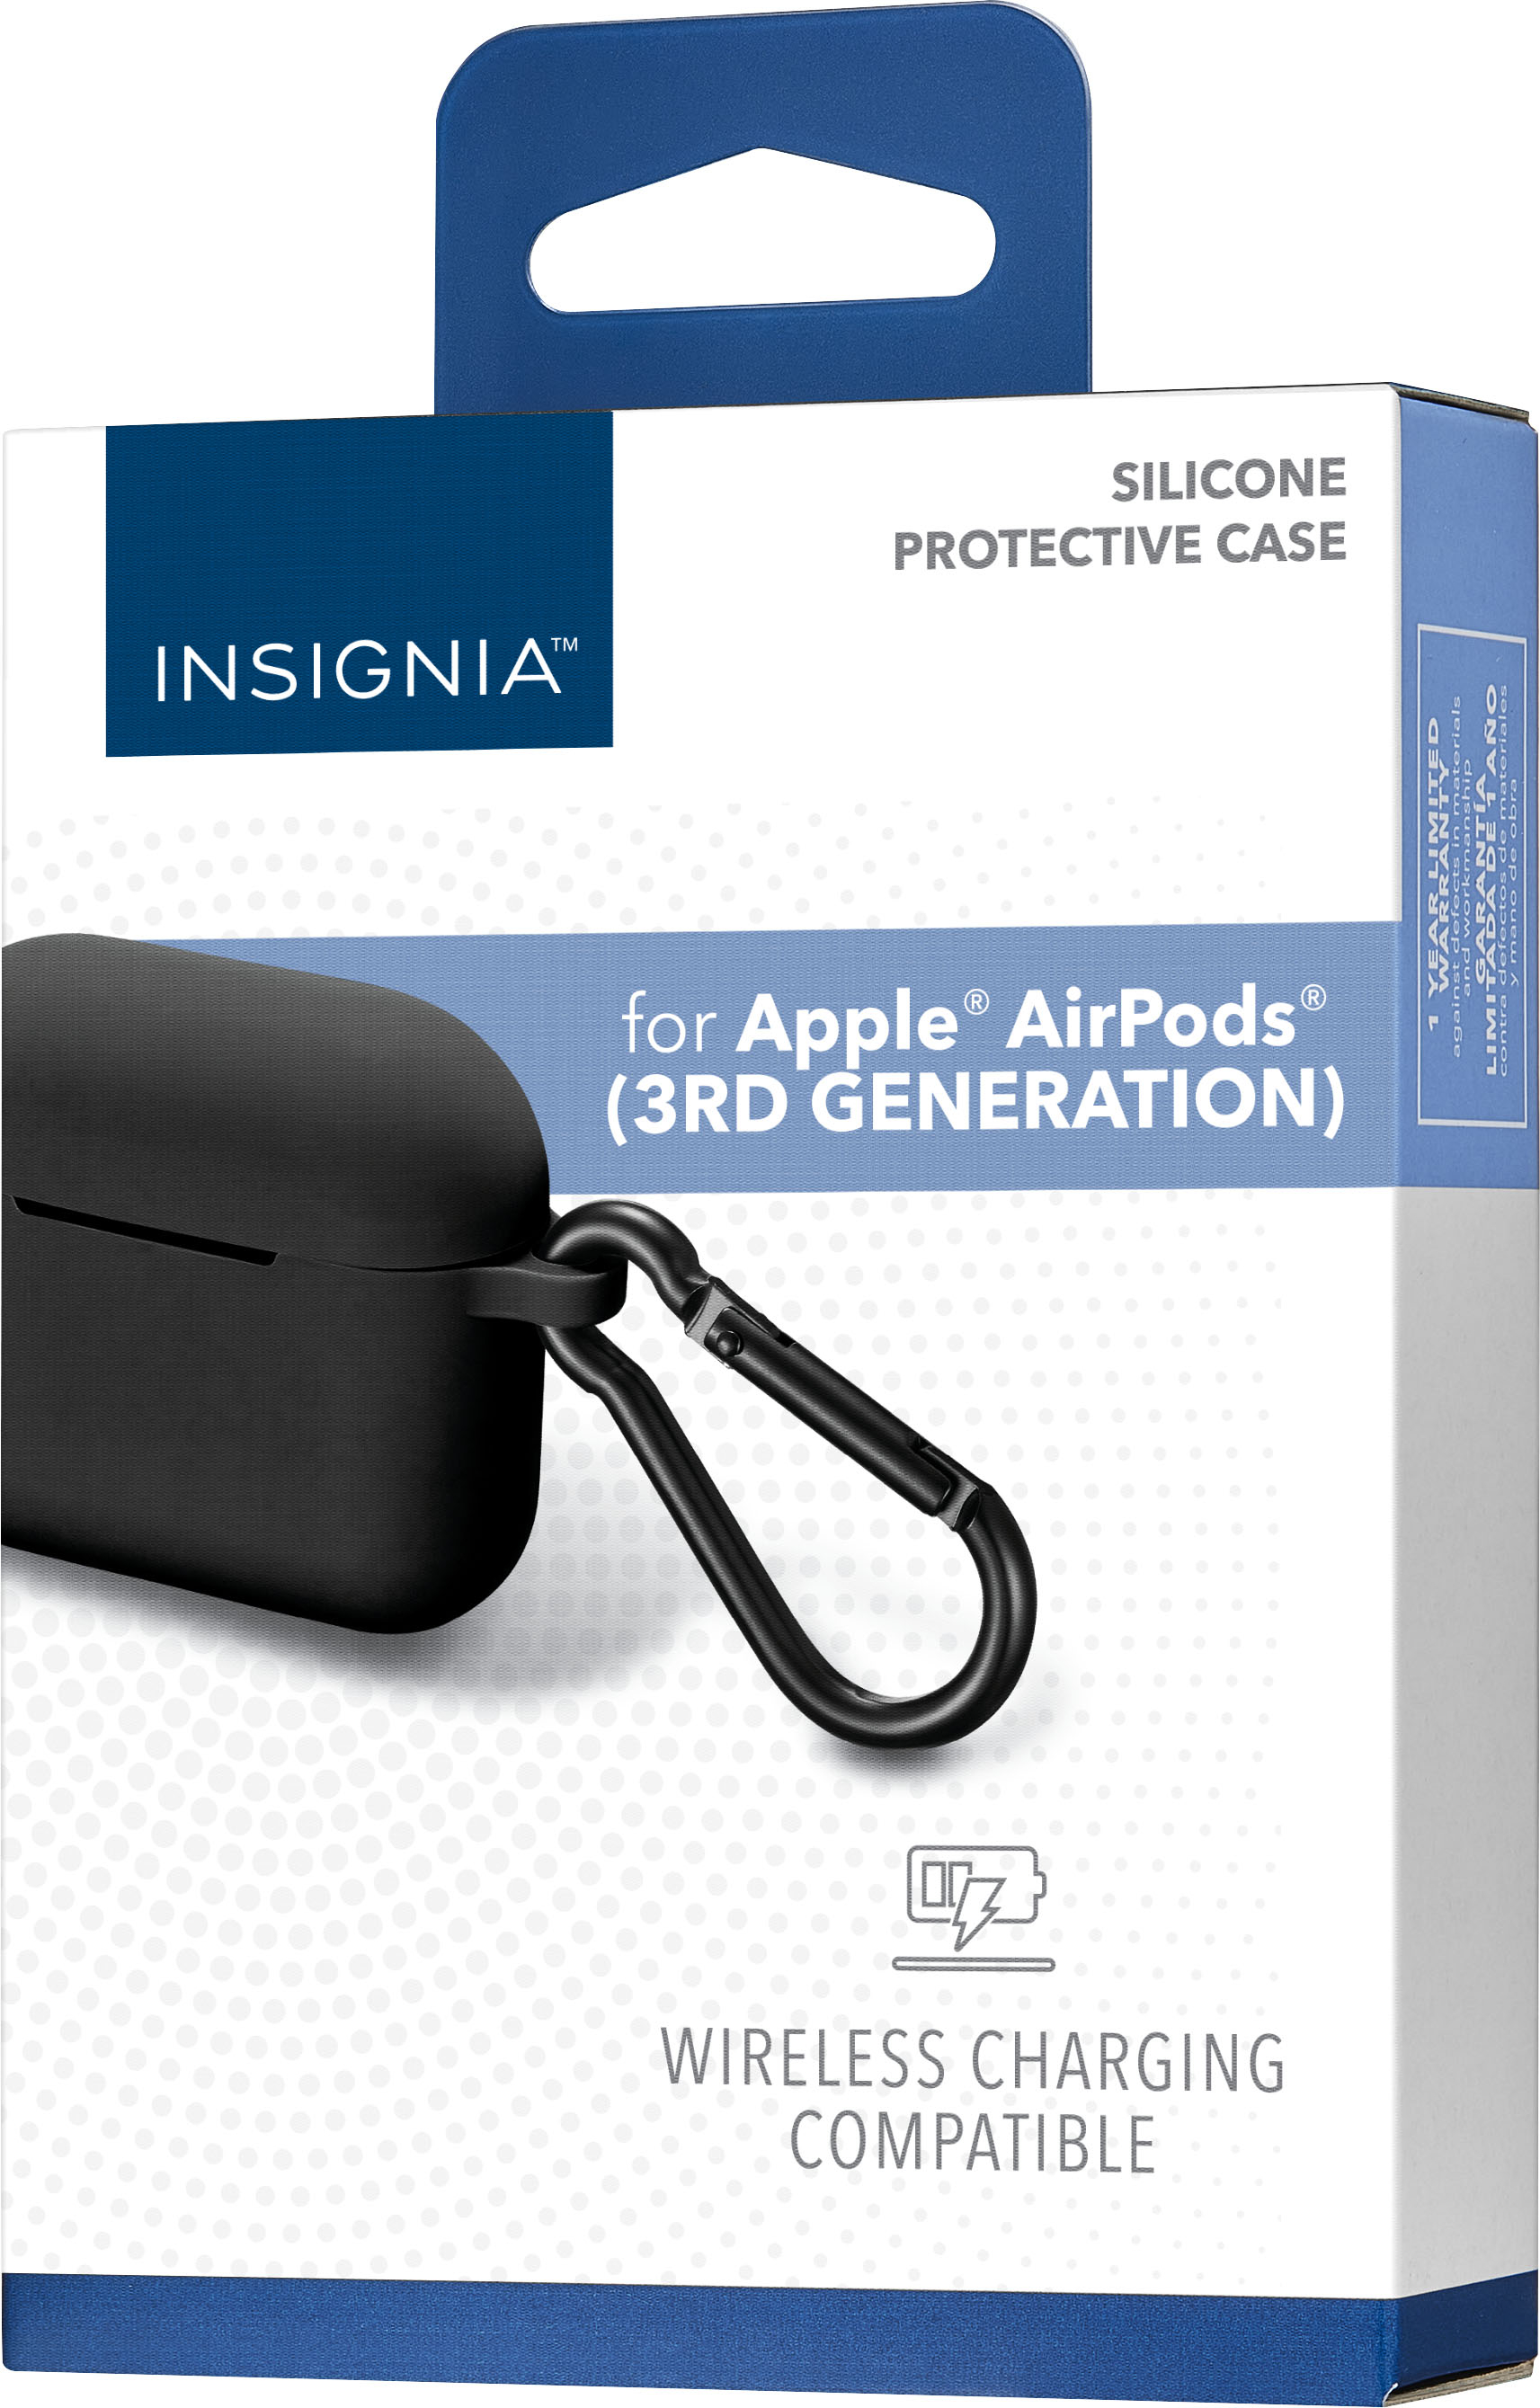 Best Buy: Insignia™ Silicone Case for Apple AirPods (3rd